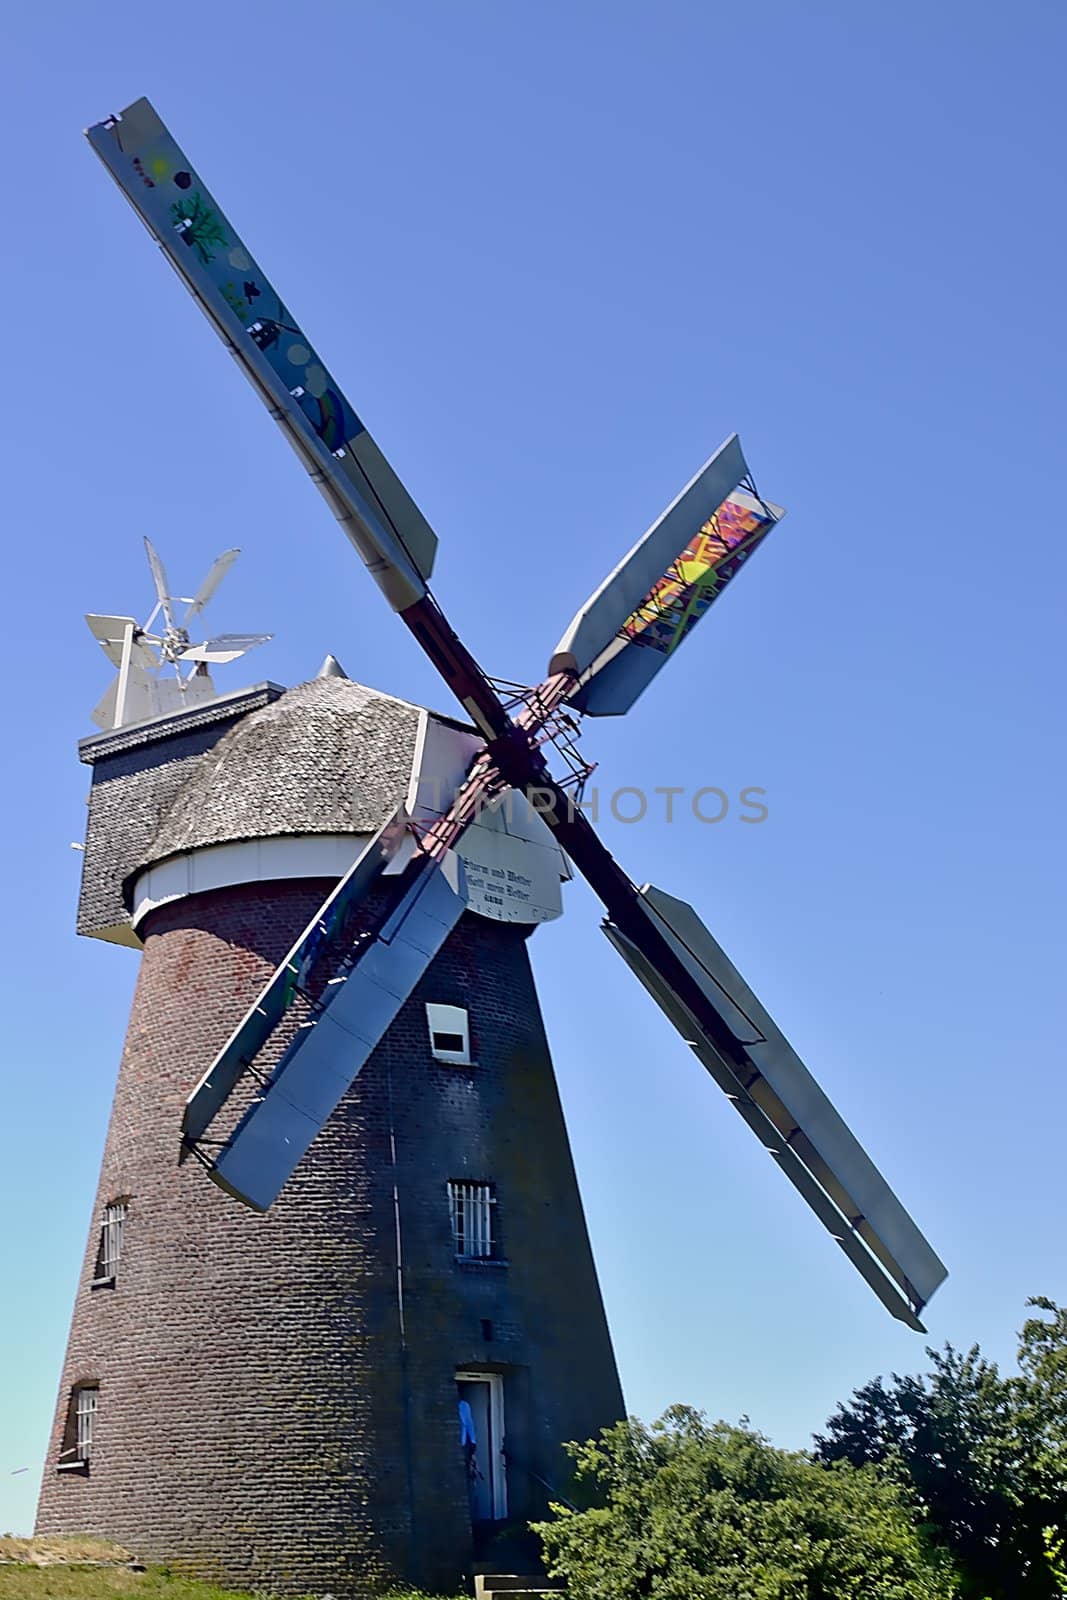 A nicely restored windmill on a beautiful sunny day in june.